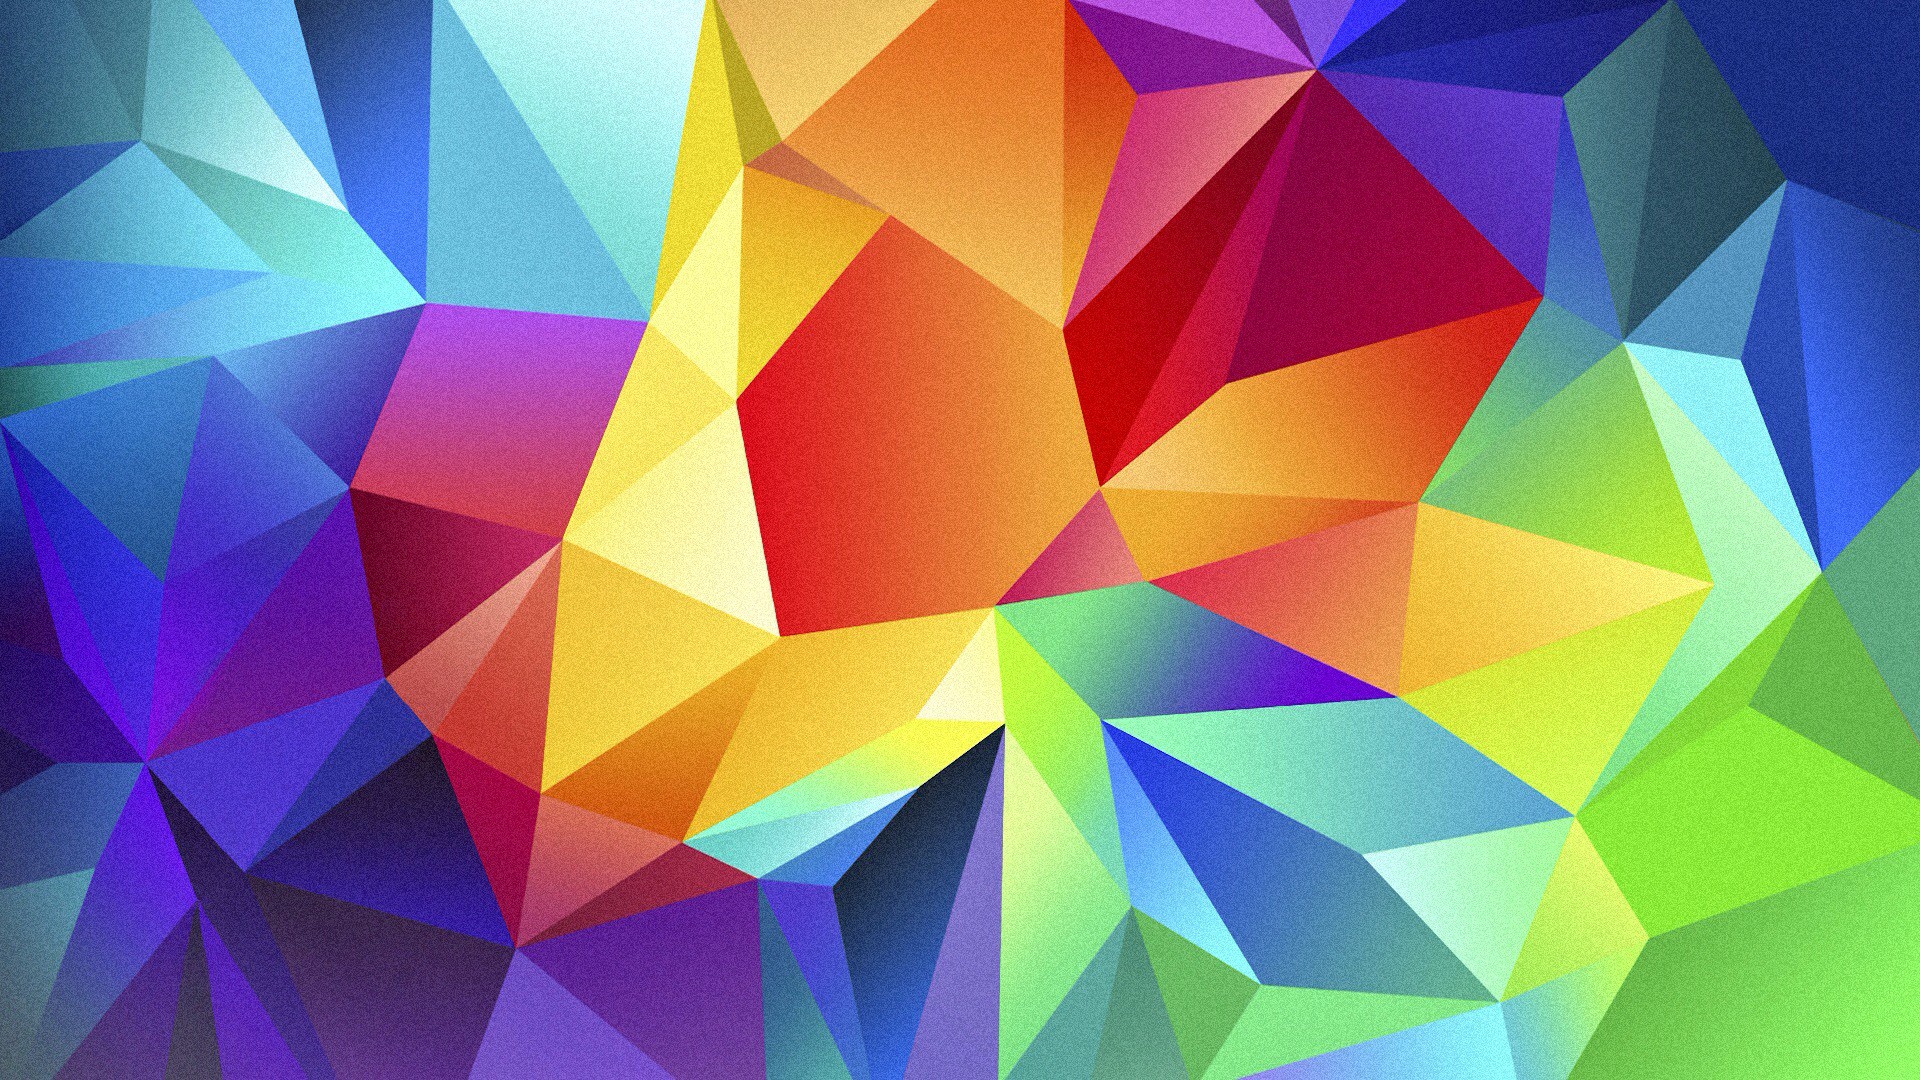 Free photo: Abstract colorful background - Abstract, Colorful, Design